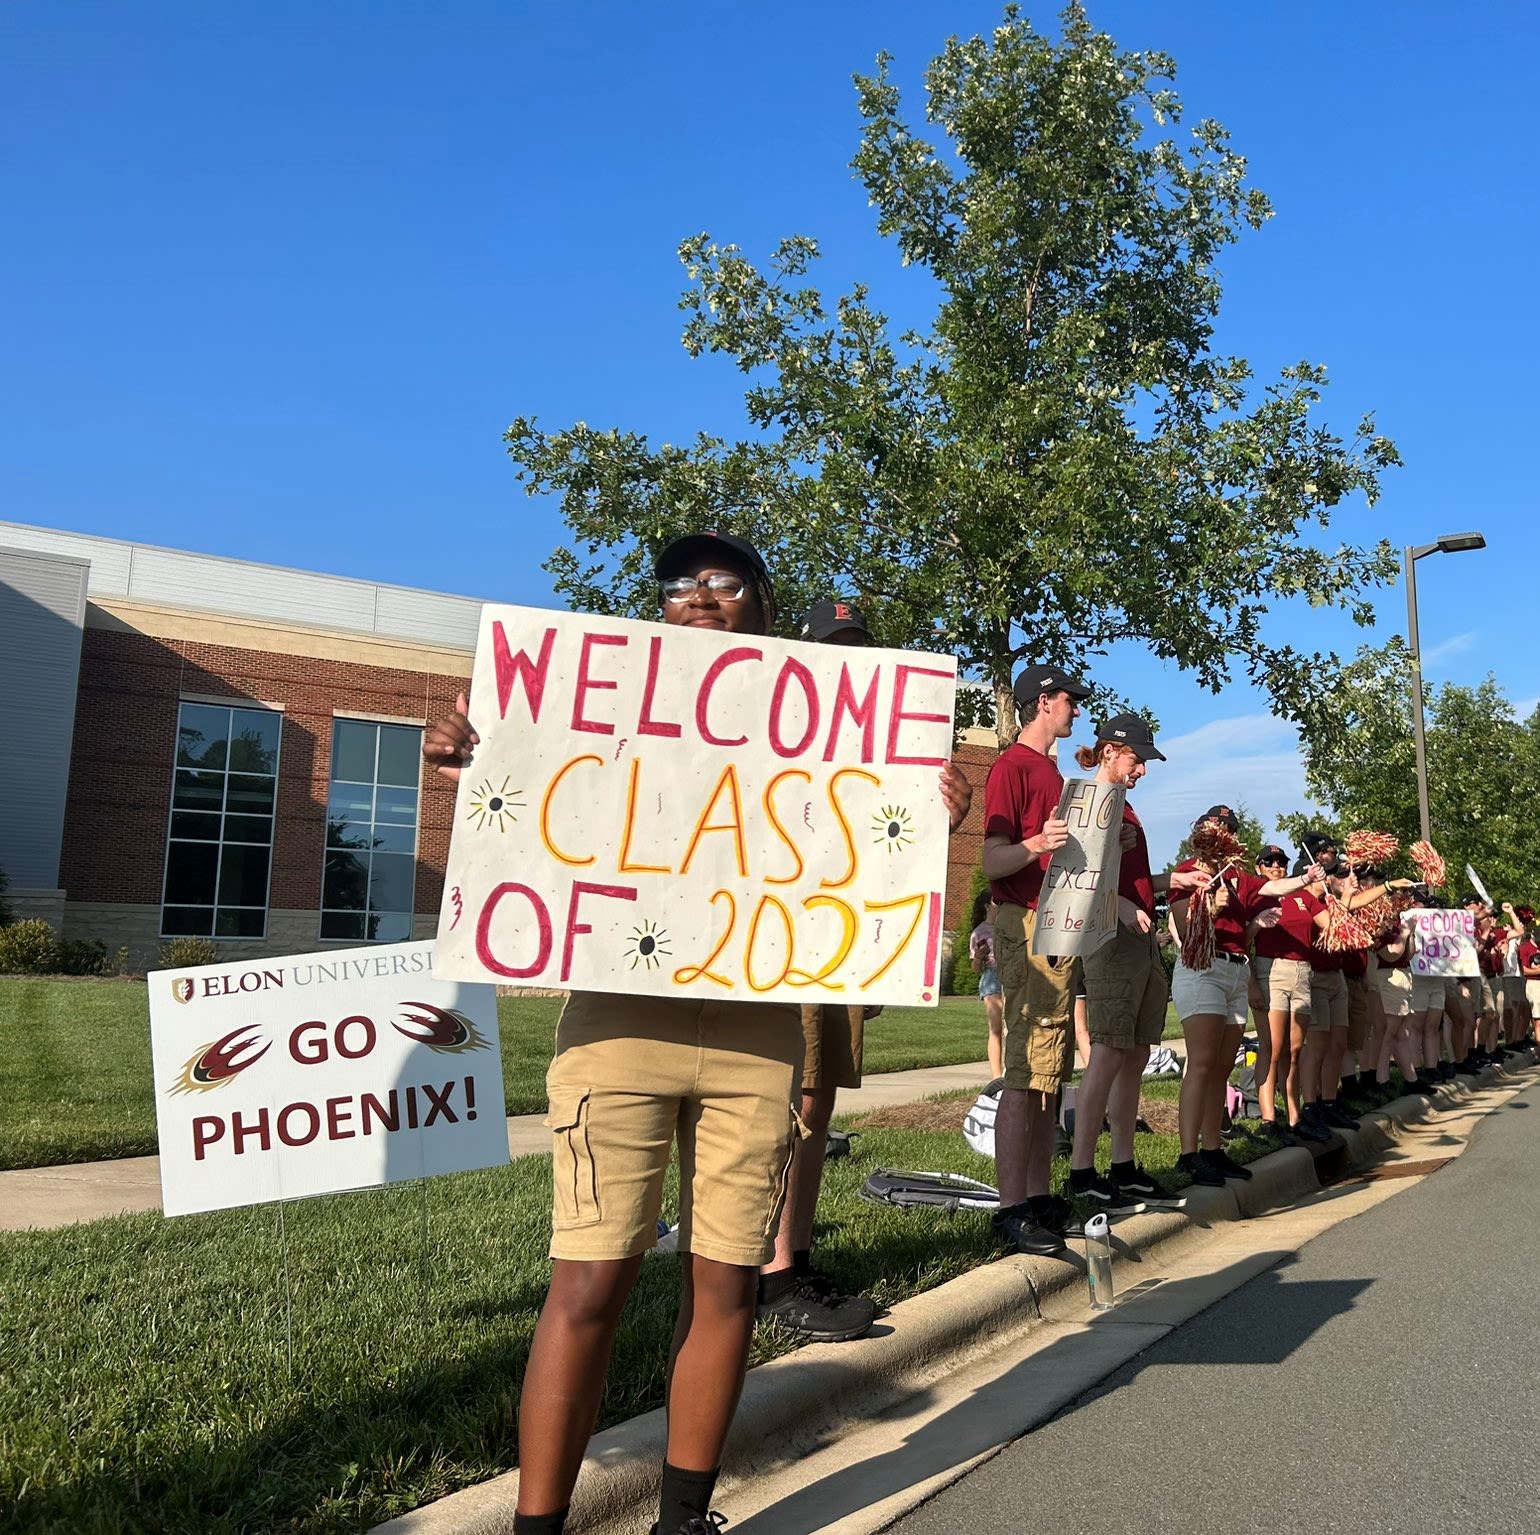 Members of the Fire of the Carolinas welcome the class of 2027 with spirit as they cheer and celebrate as students pull in for check-in at the Schar Center on Aug. 18. Photo by: Abby Hobbs